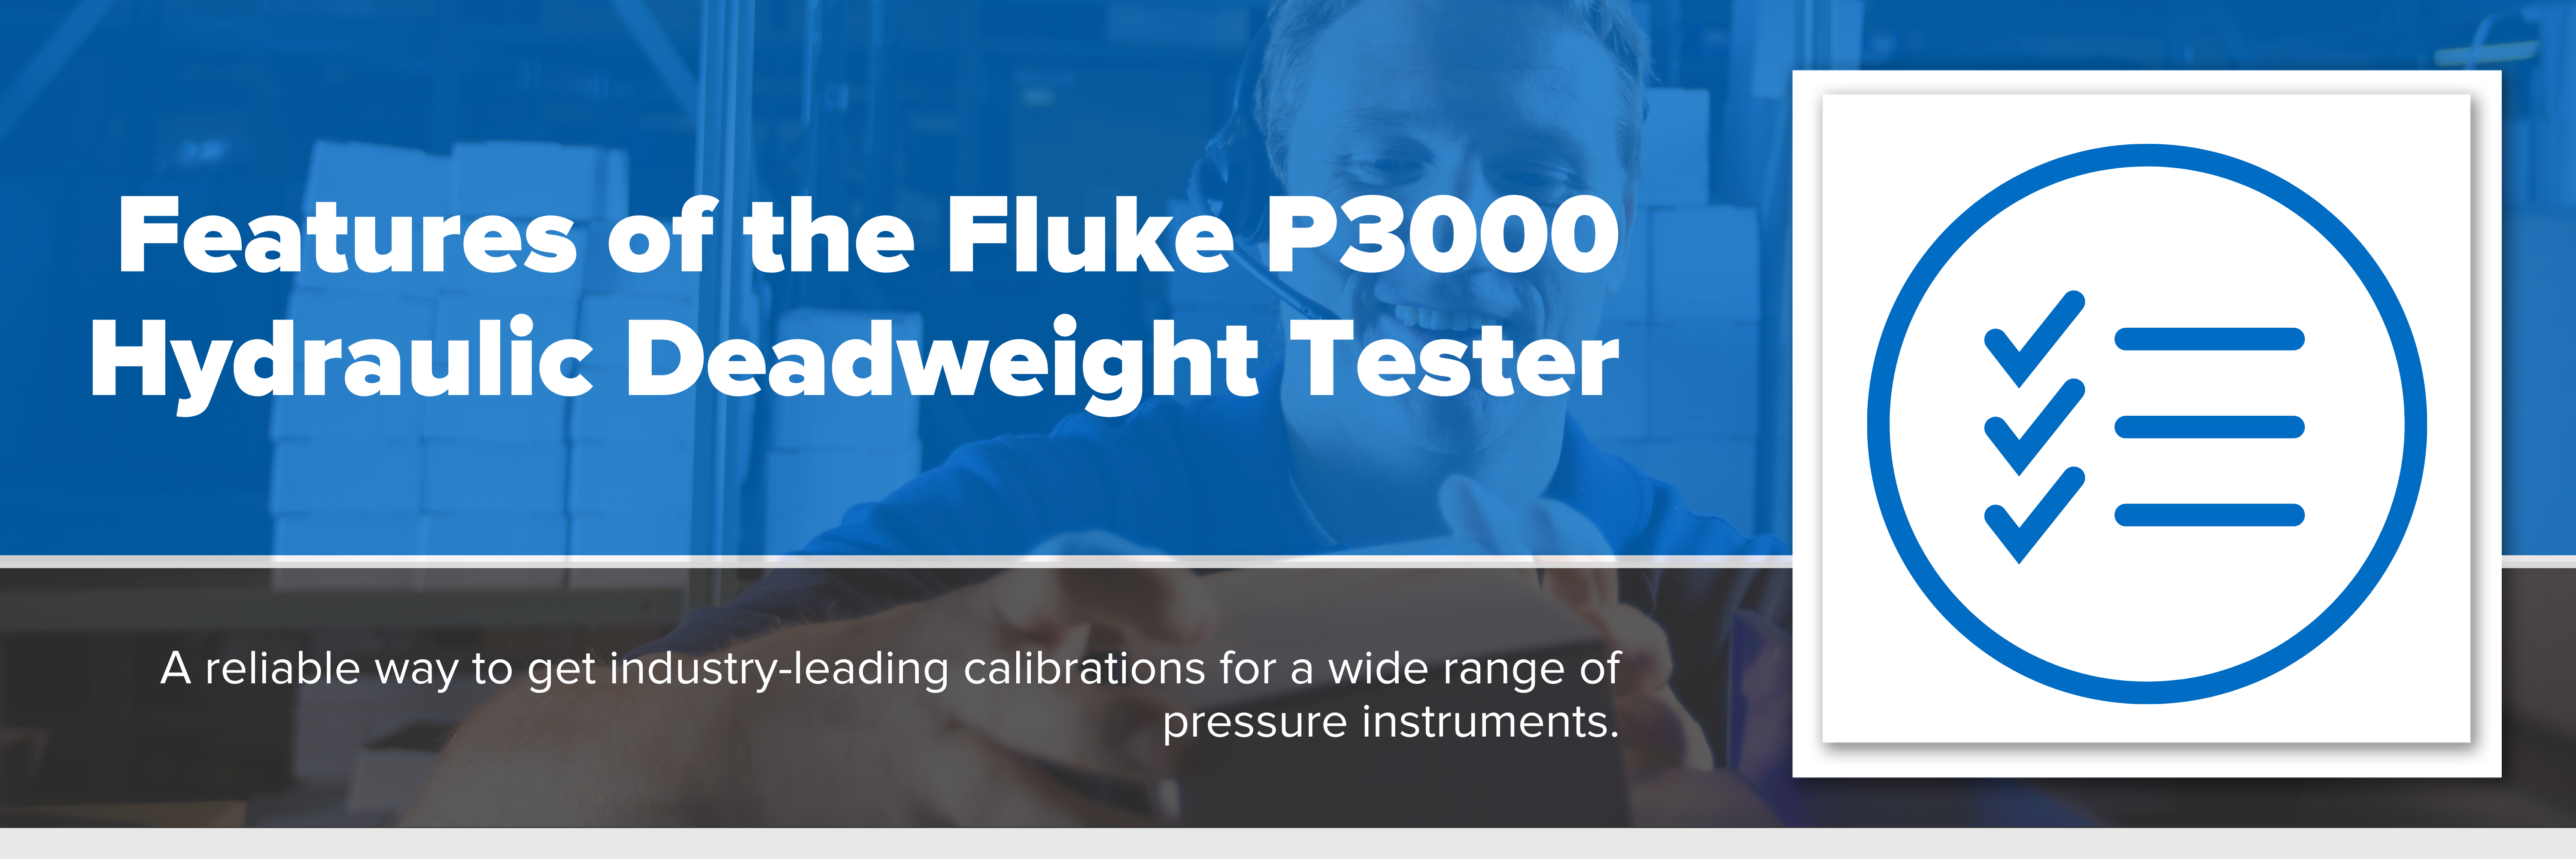 Header image with text "Features of the Fluke P3000 Hydraulic Deadweight Tester"